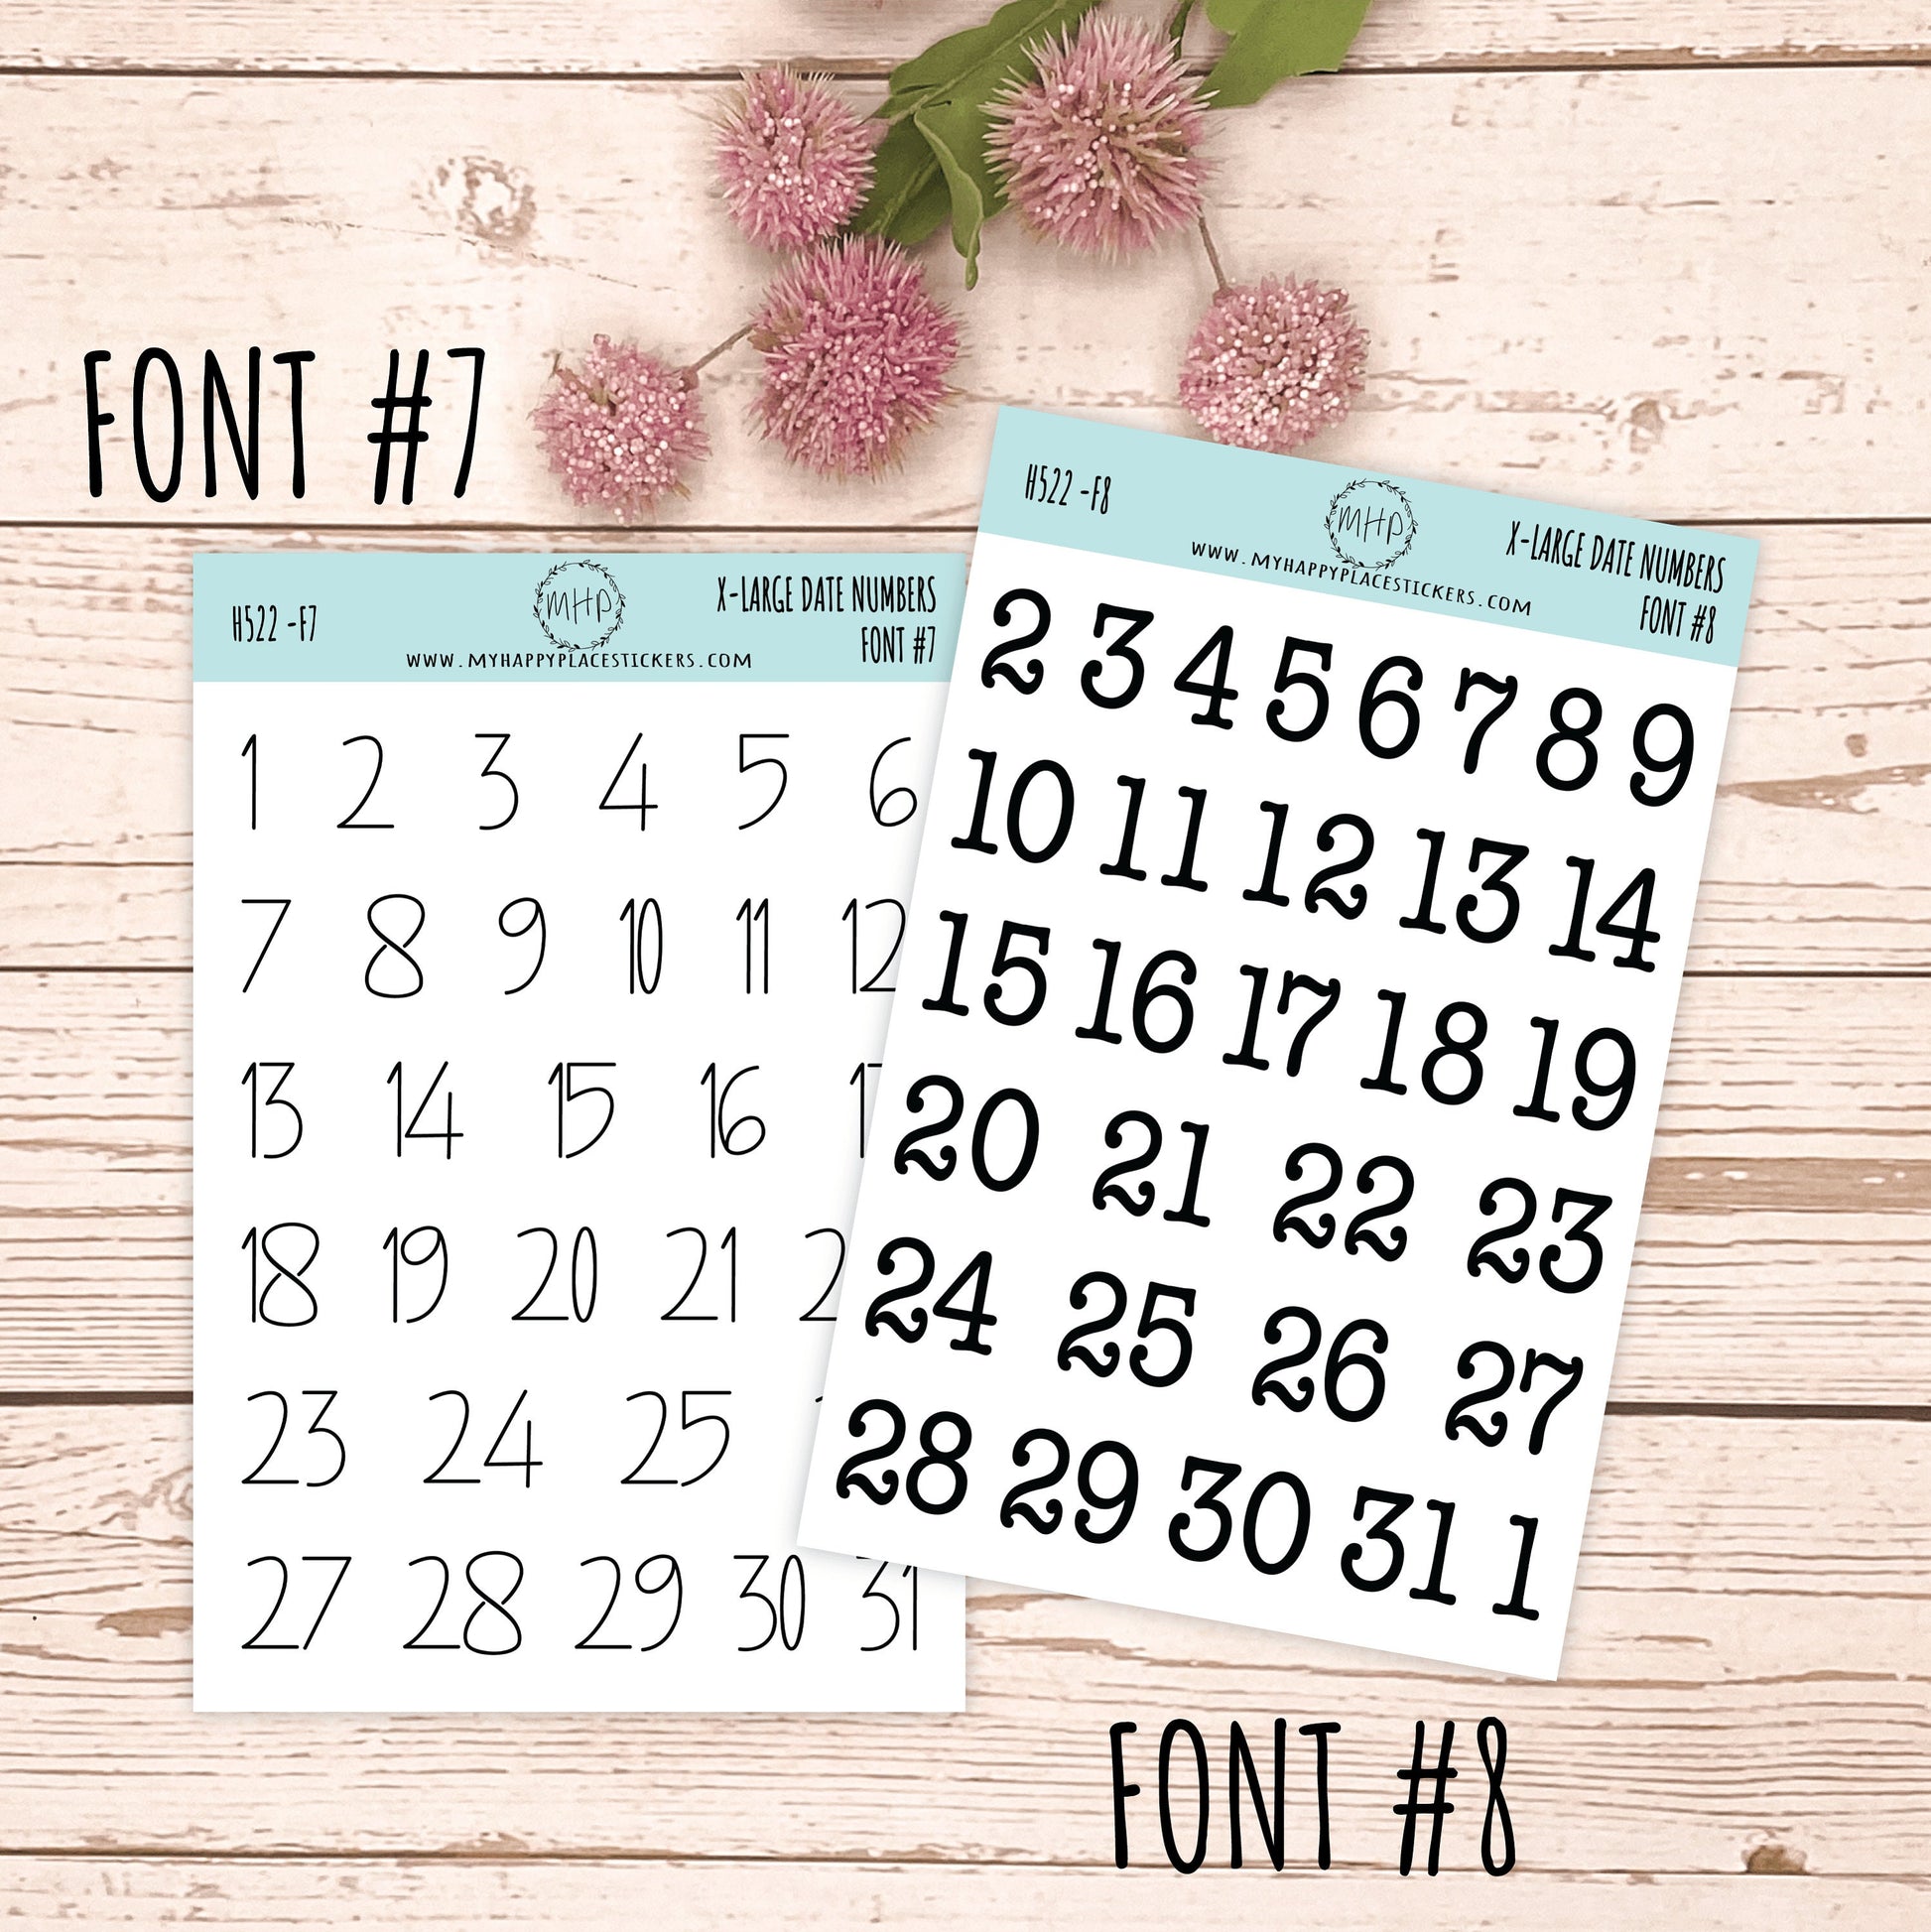 Sticker Set of X-Large Date Number Stickers for Planners